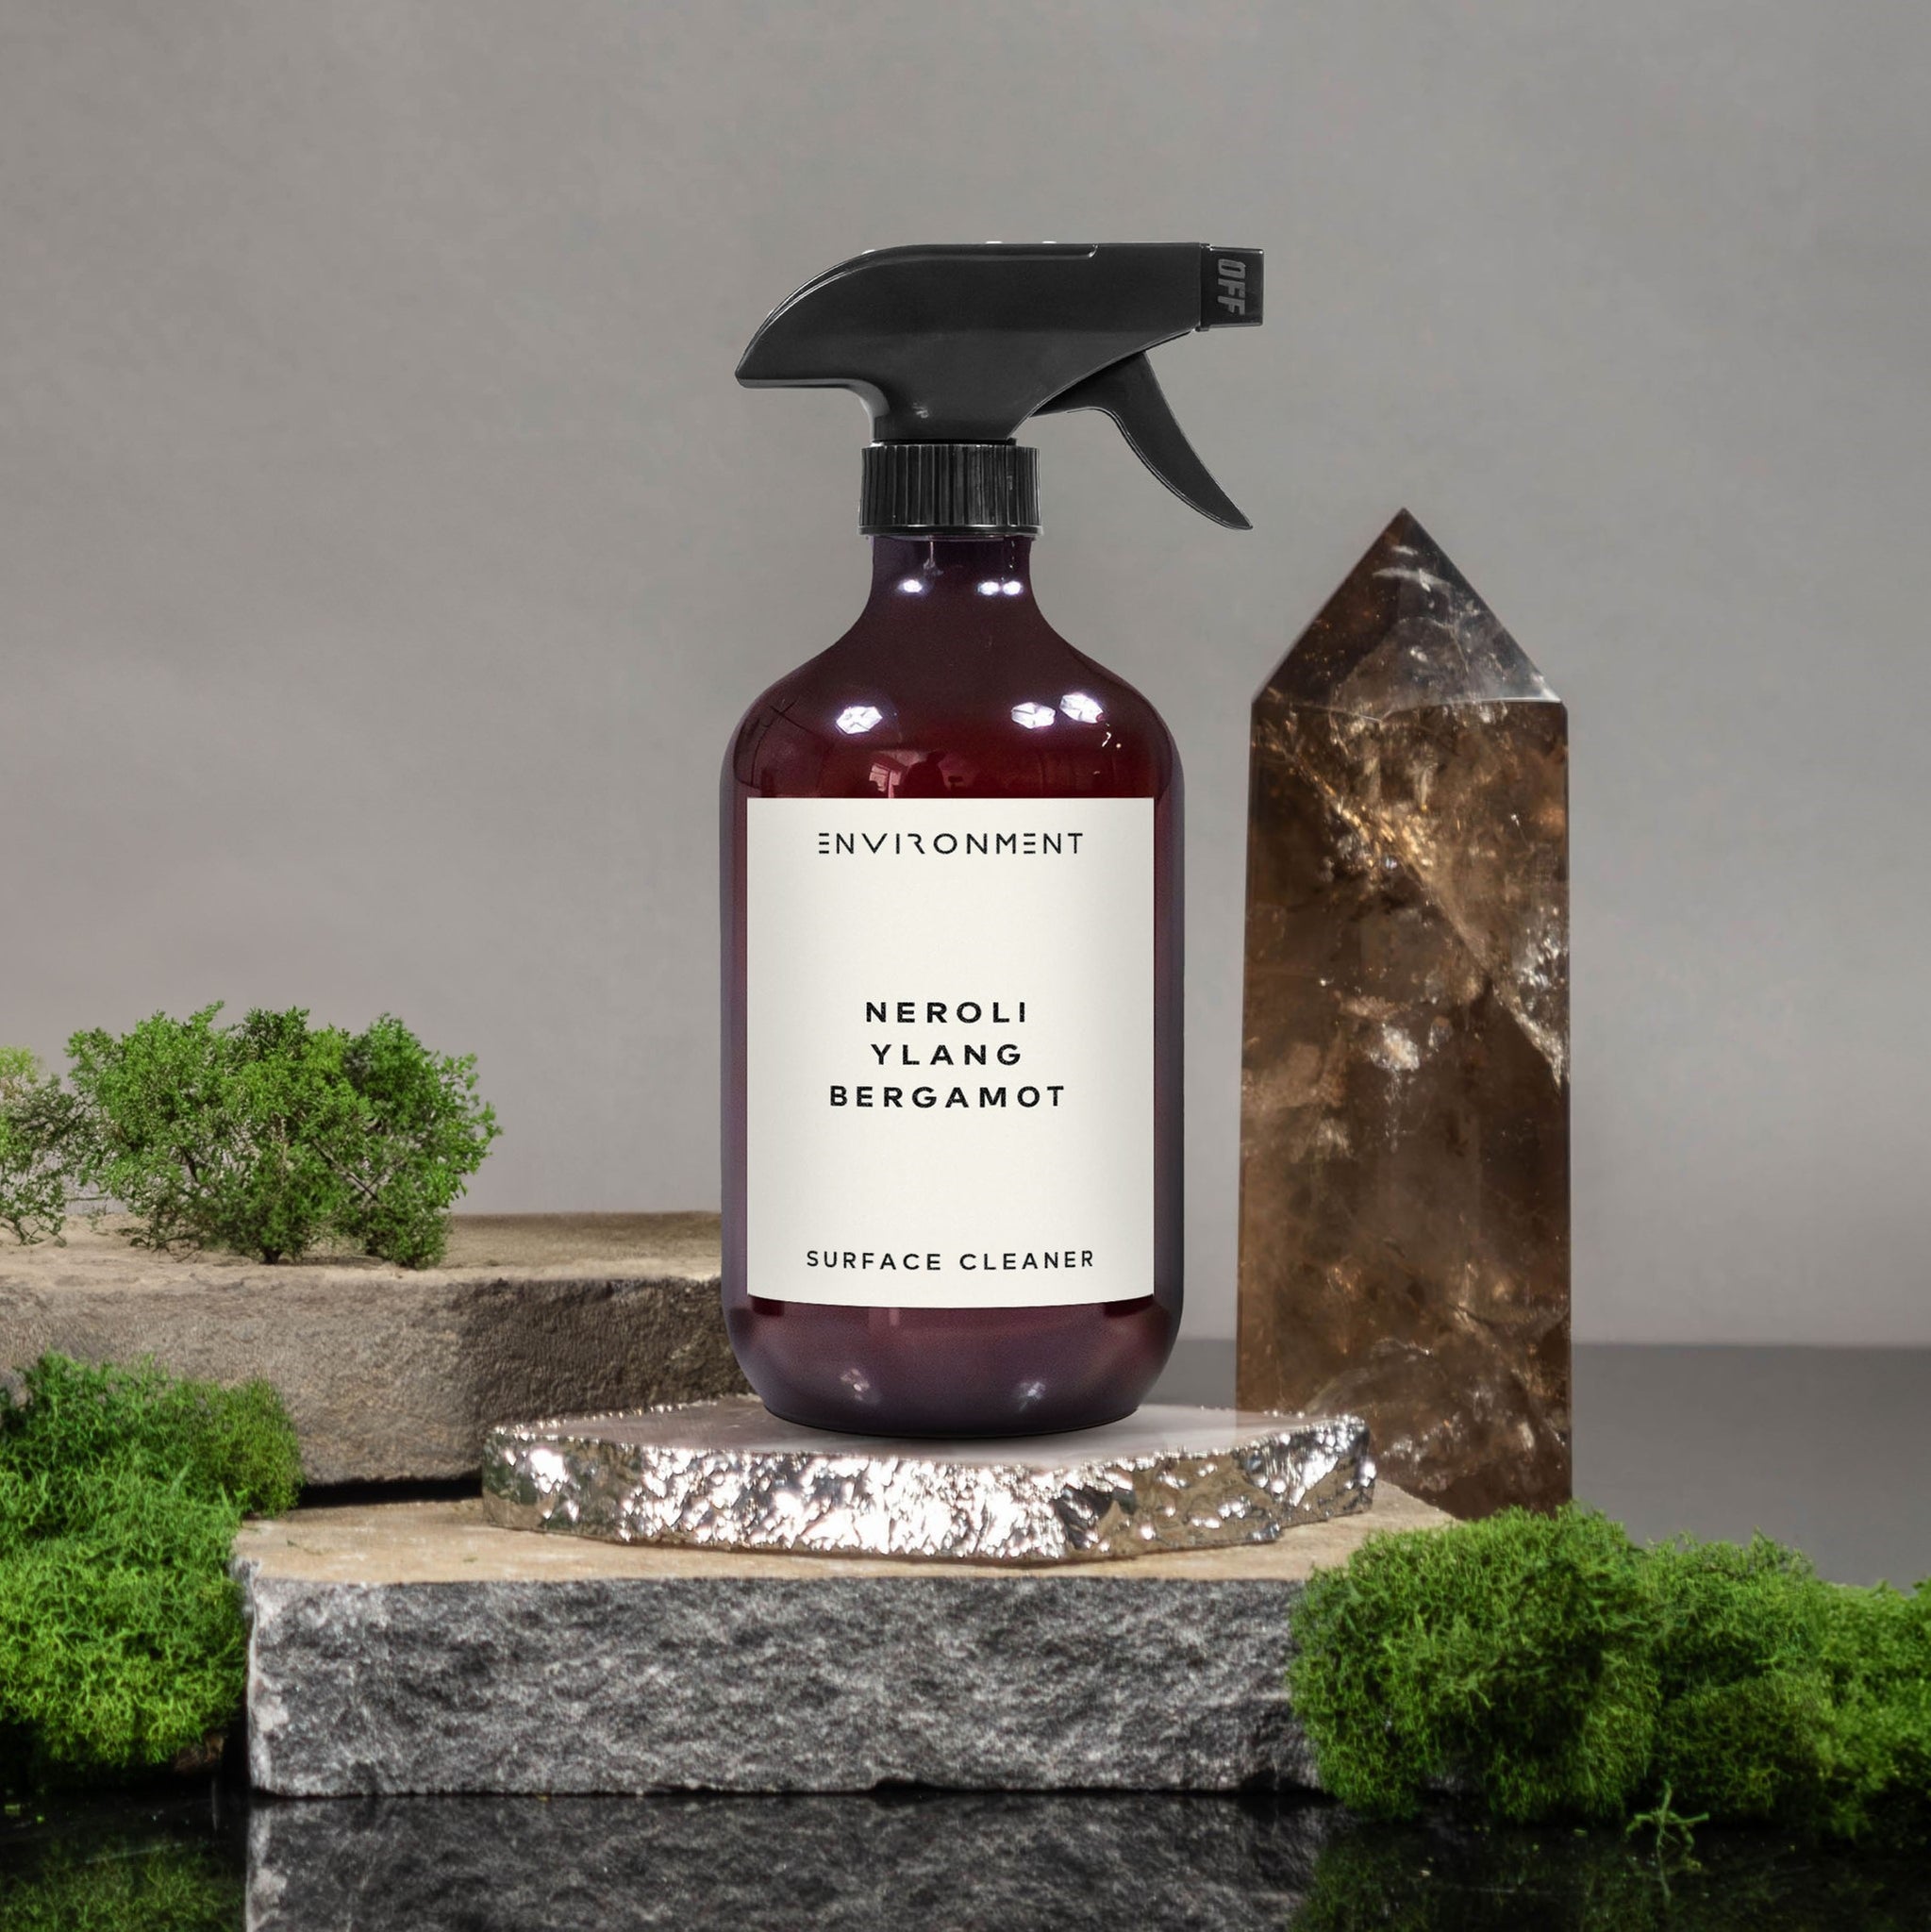 Neroli | Ylang | Bergamot Surface Cleaner (Inspired by Chanel Chanel #5®)